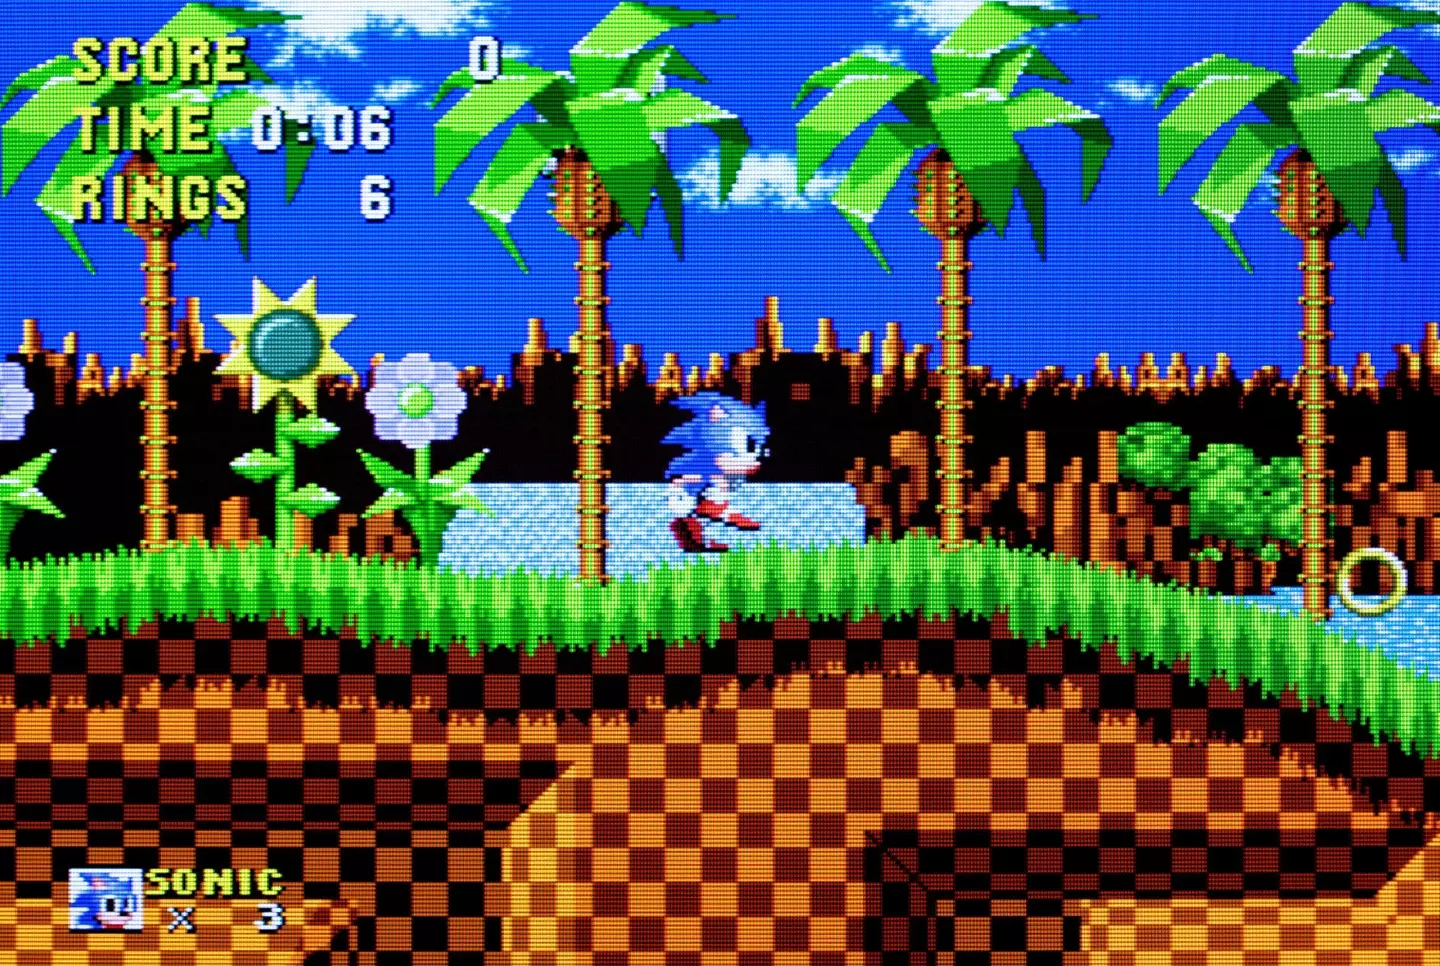 Naka was heavily involved in the development of the first Sonic the Hedgehog games.